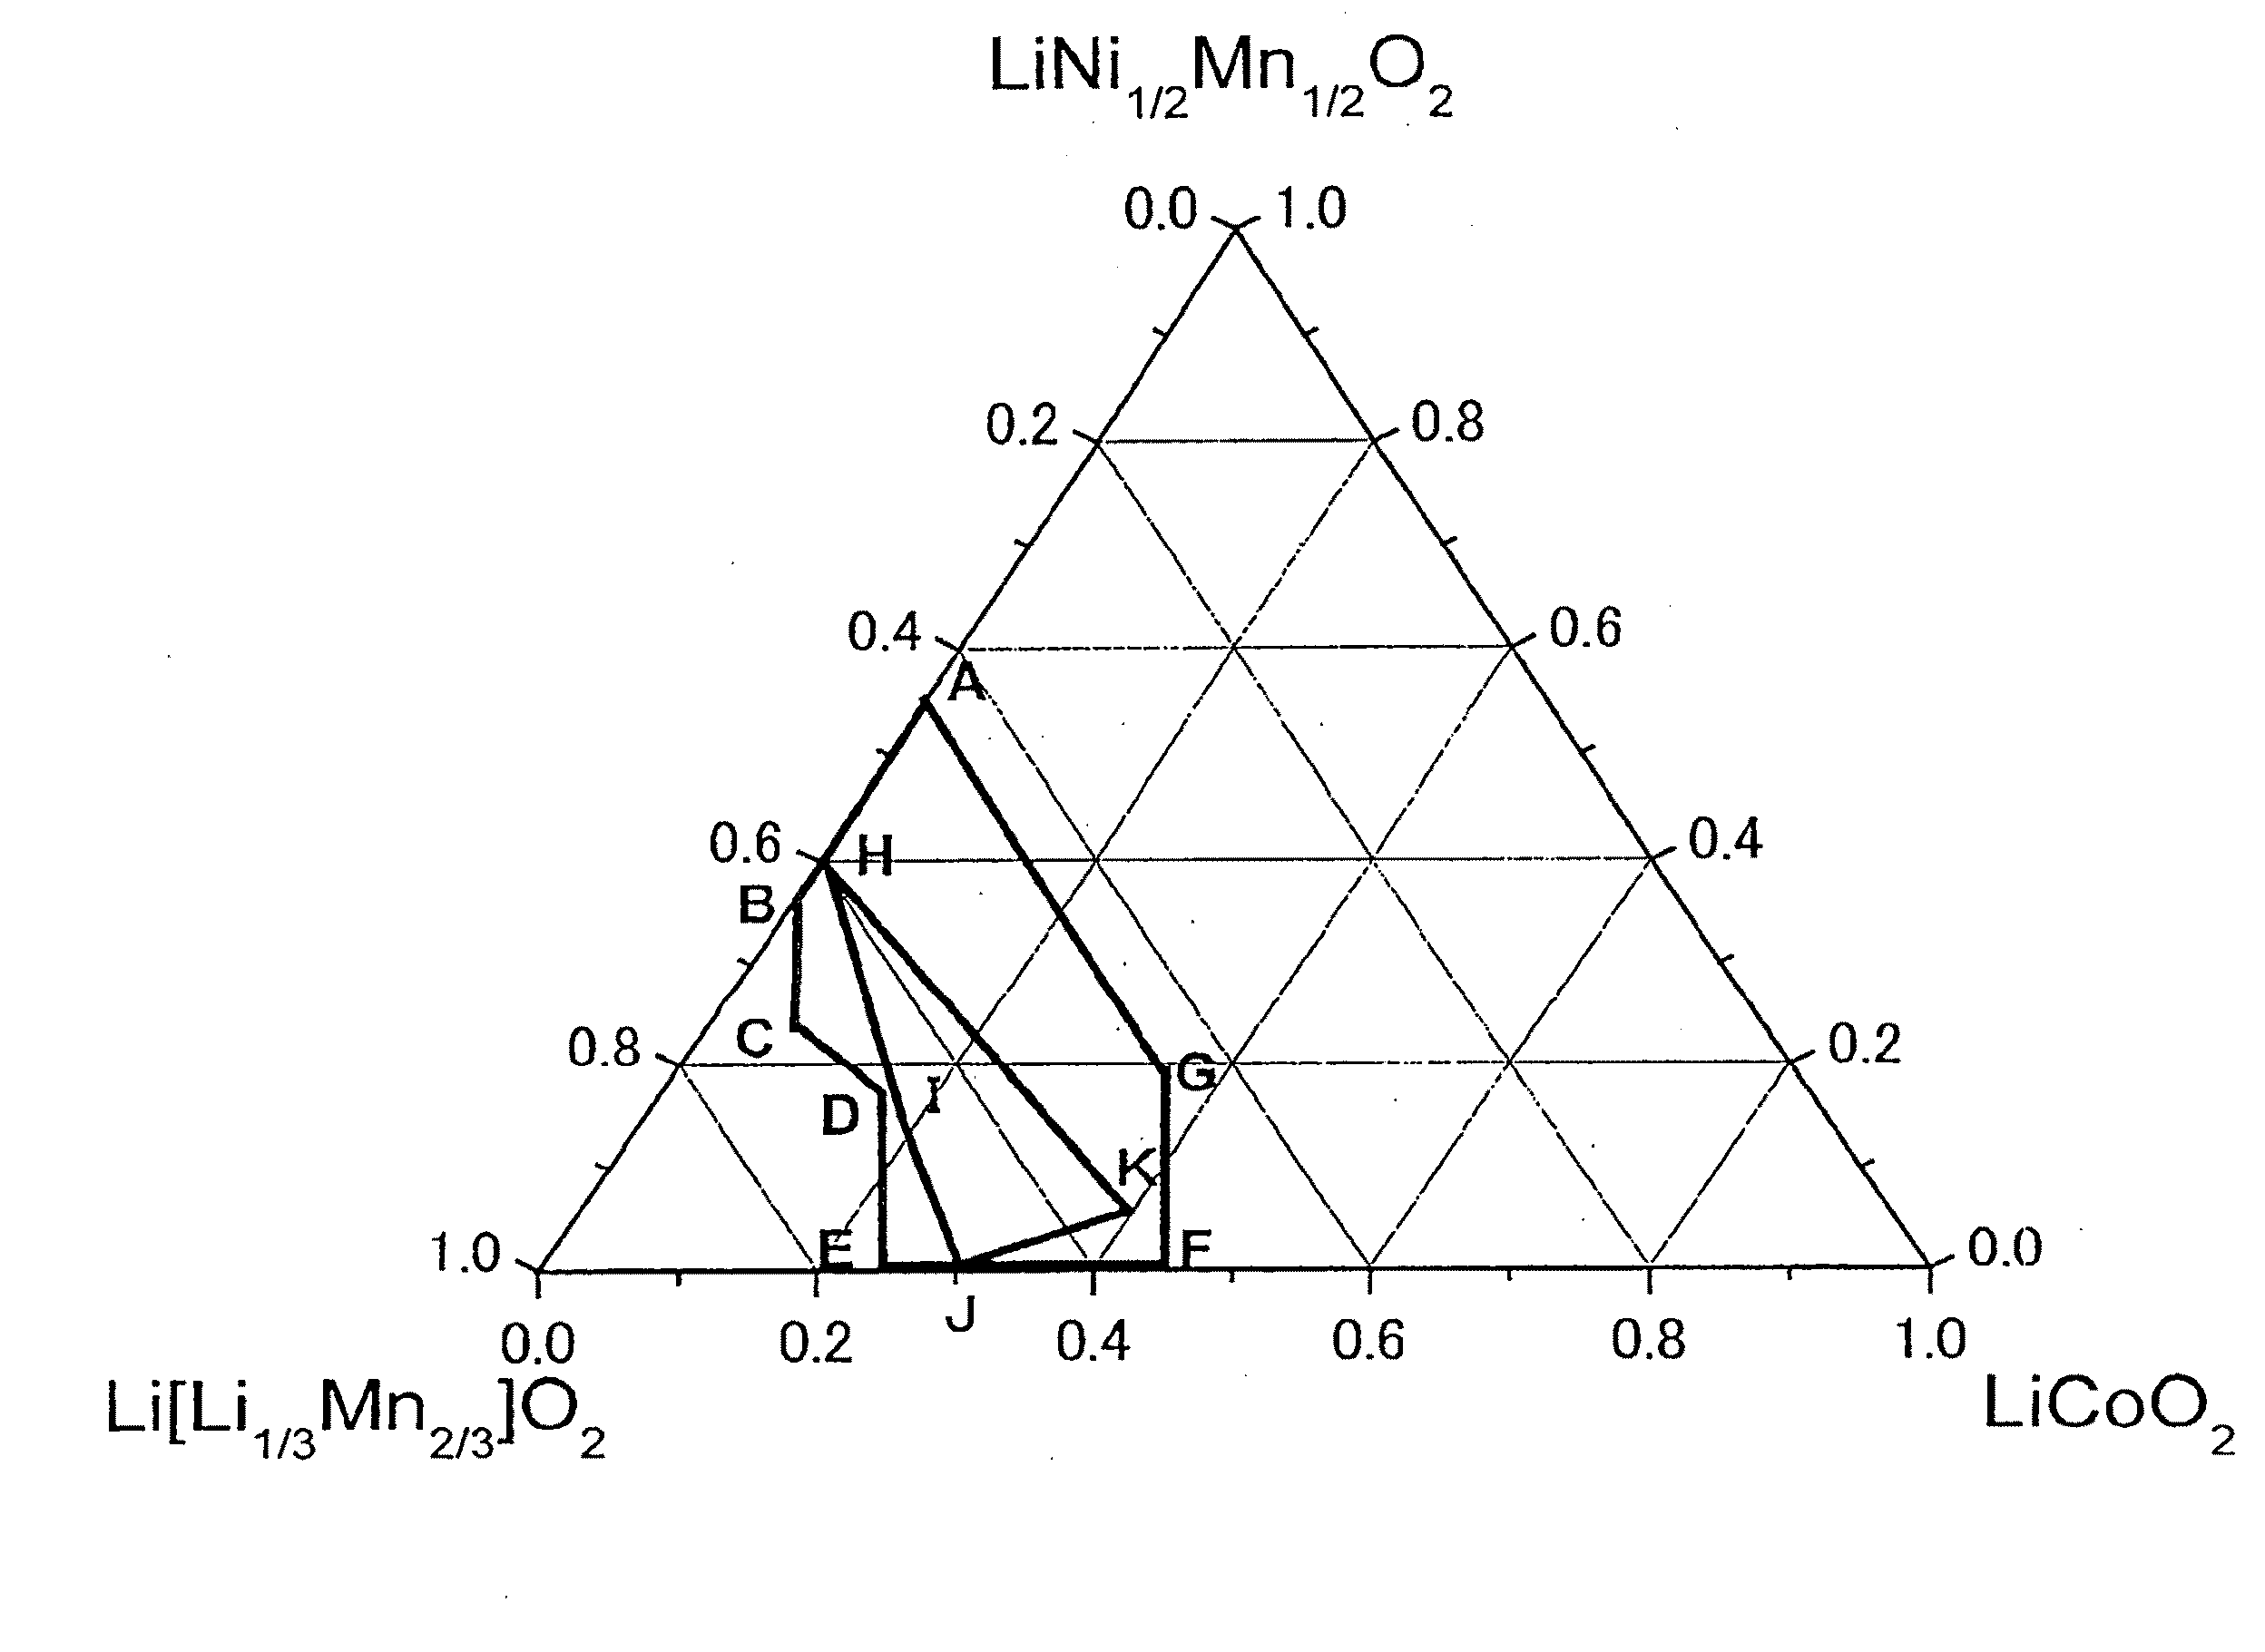 Process for producing lithium secondary battery